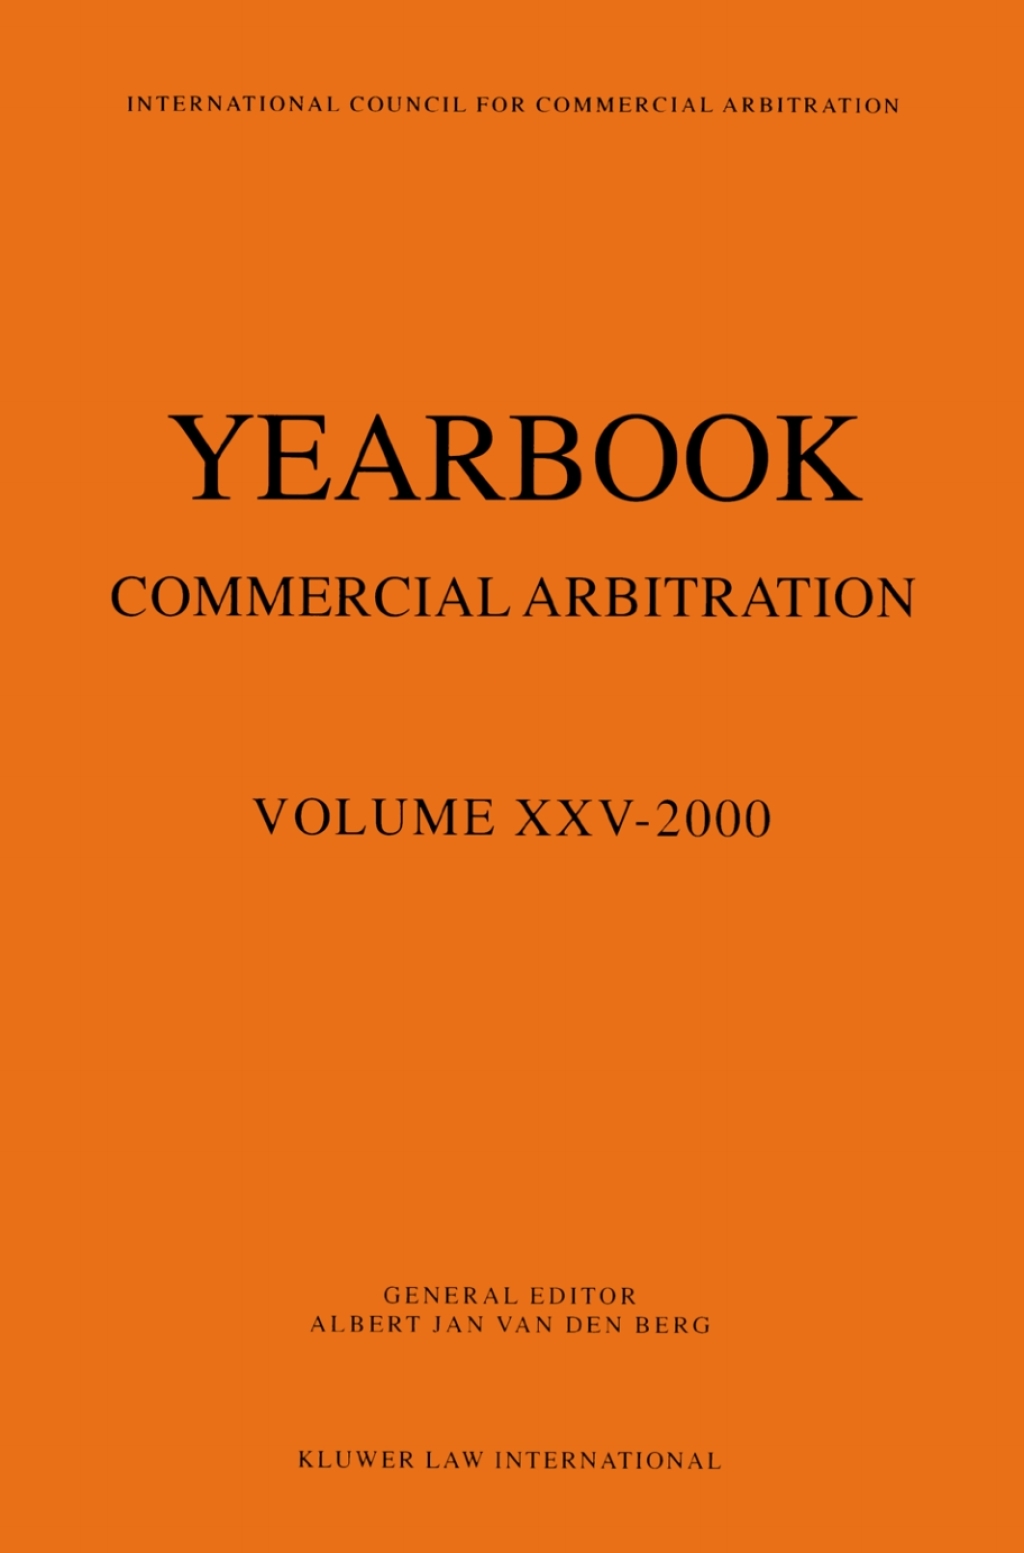 Yearbook Commercial Arbitration Volume XXV - 2000 - 1st Edition (eBook Rental)